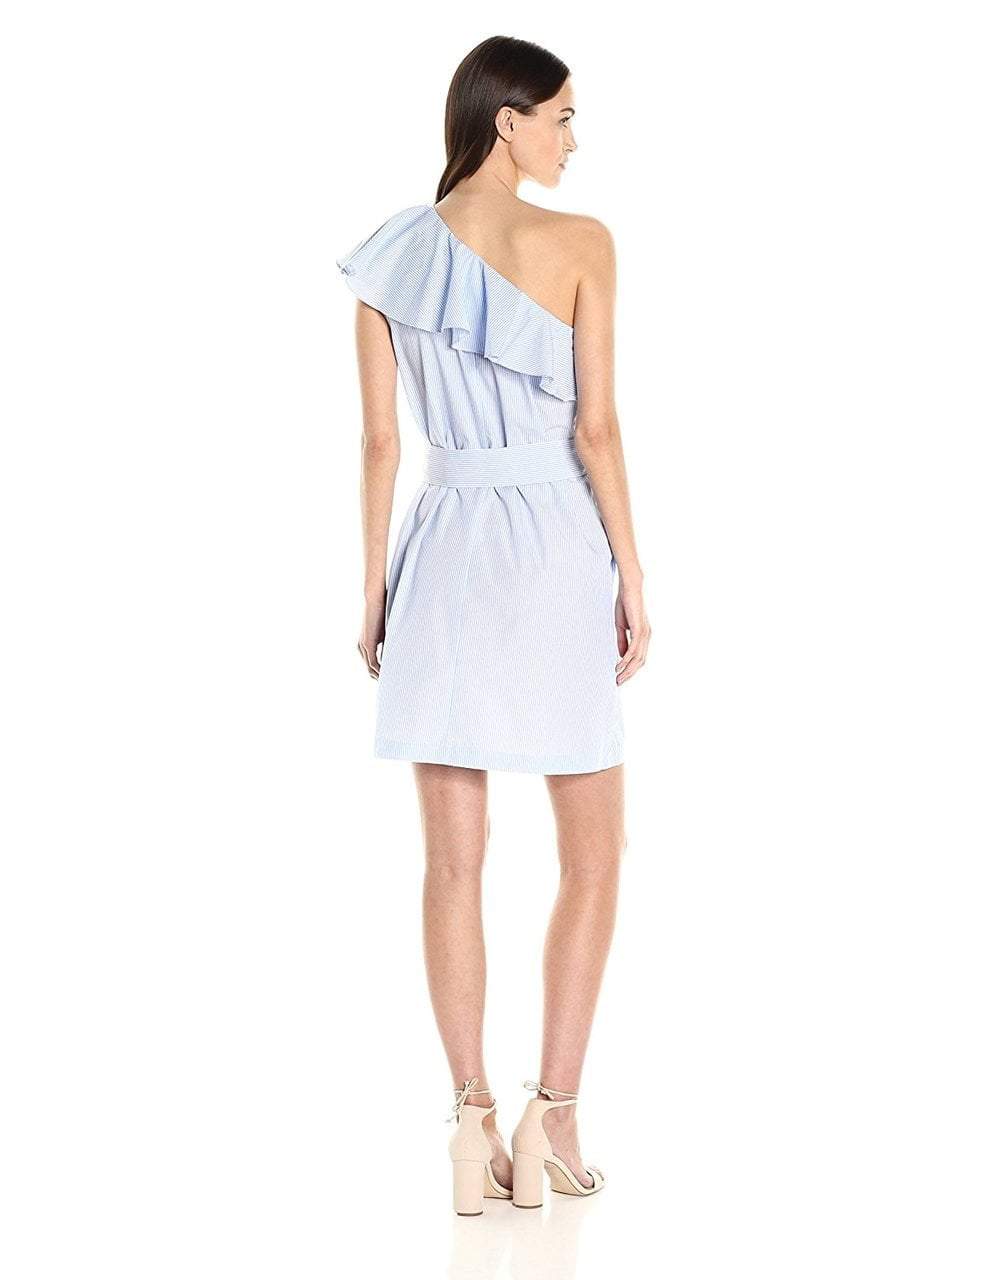 Donna Morgan - D5239M Ruffled Asymmetric A-line Dress in Blue and White